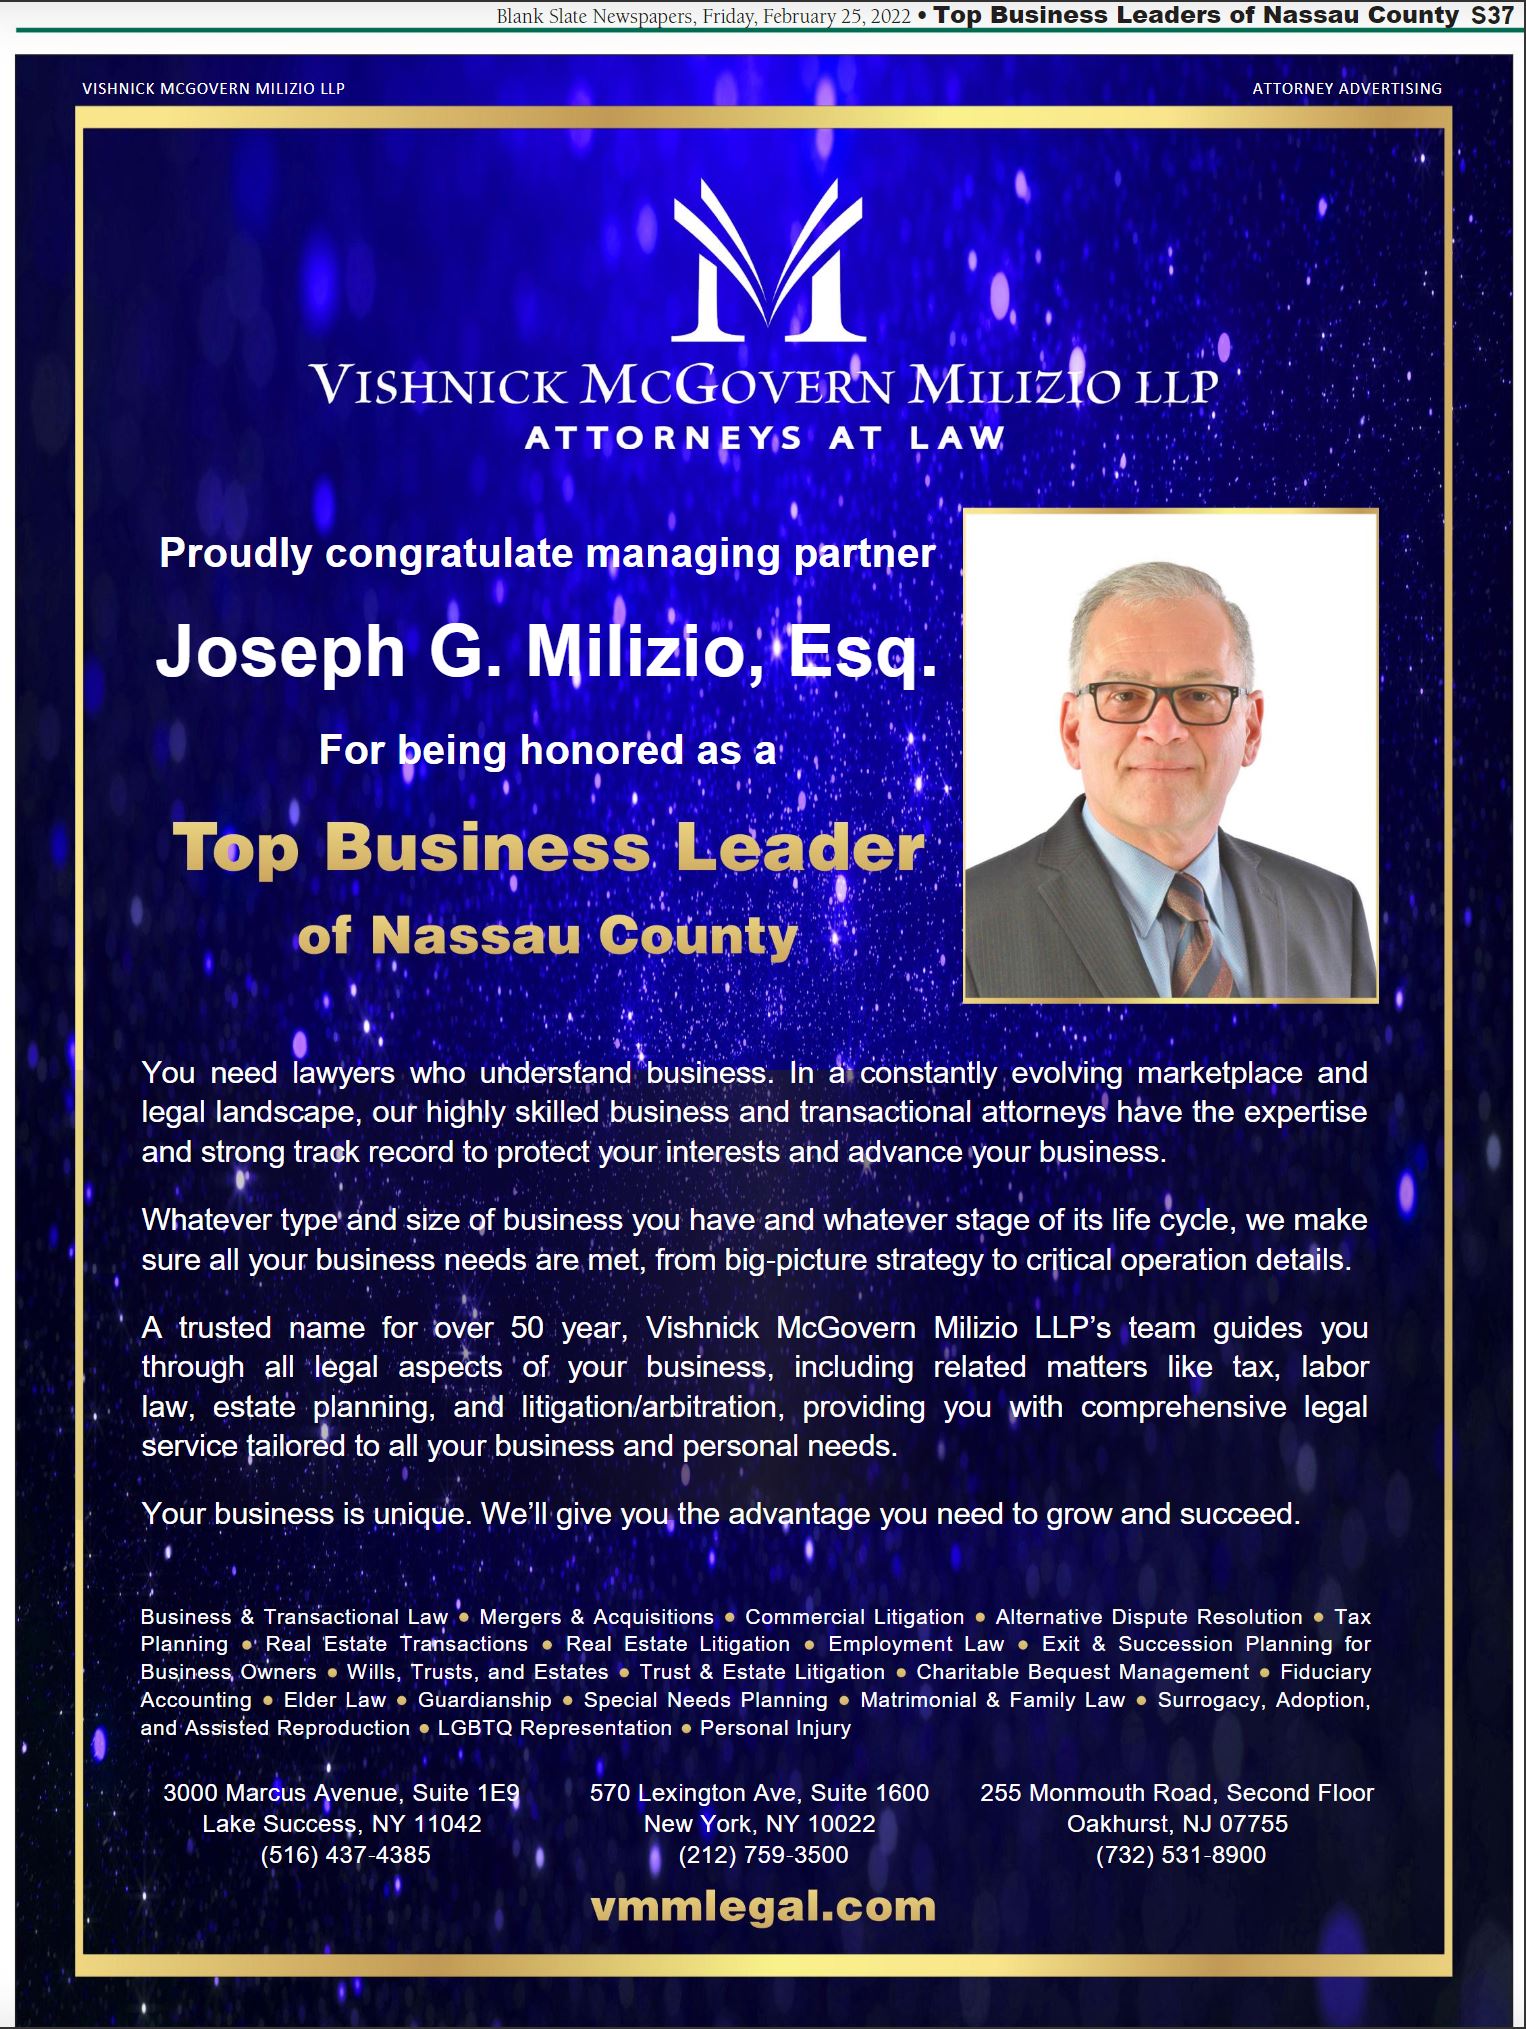 Top Business Leader in Nassau County